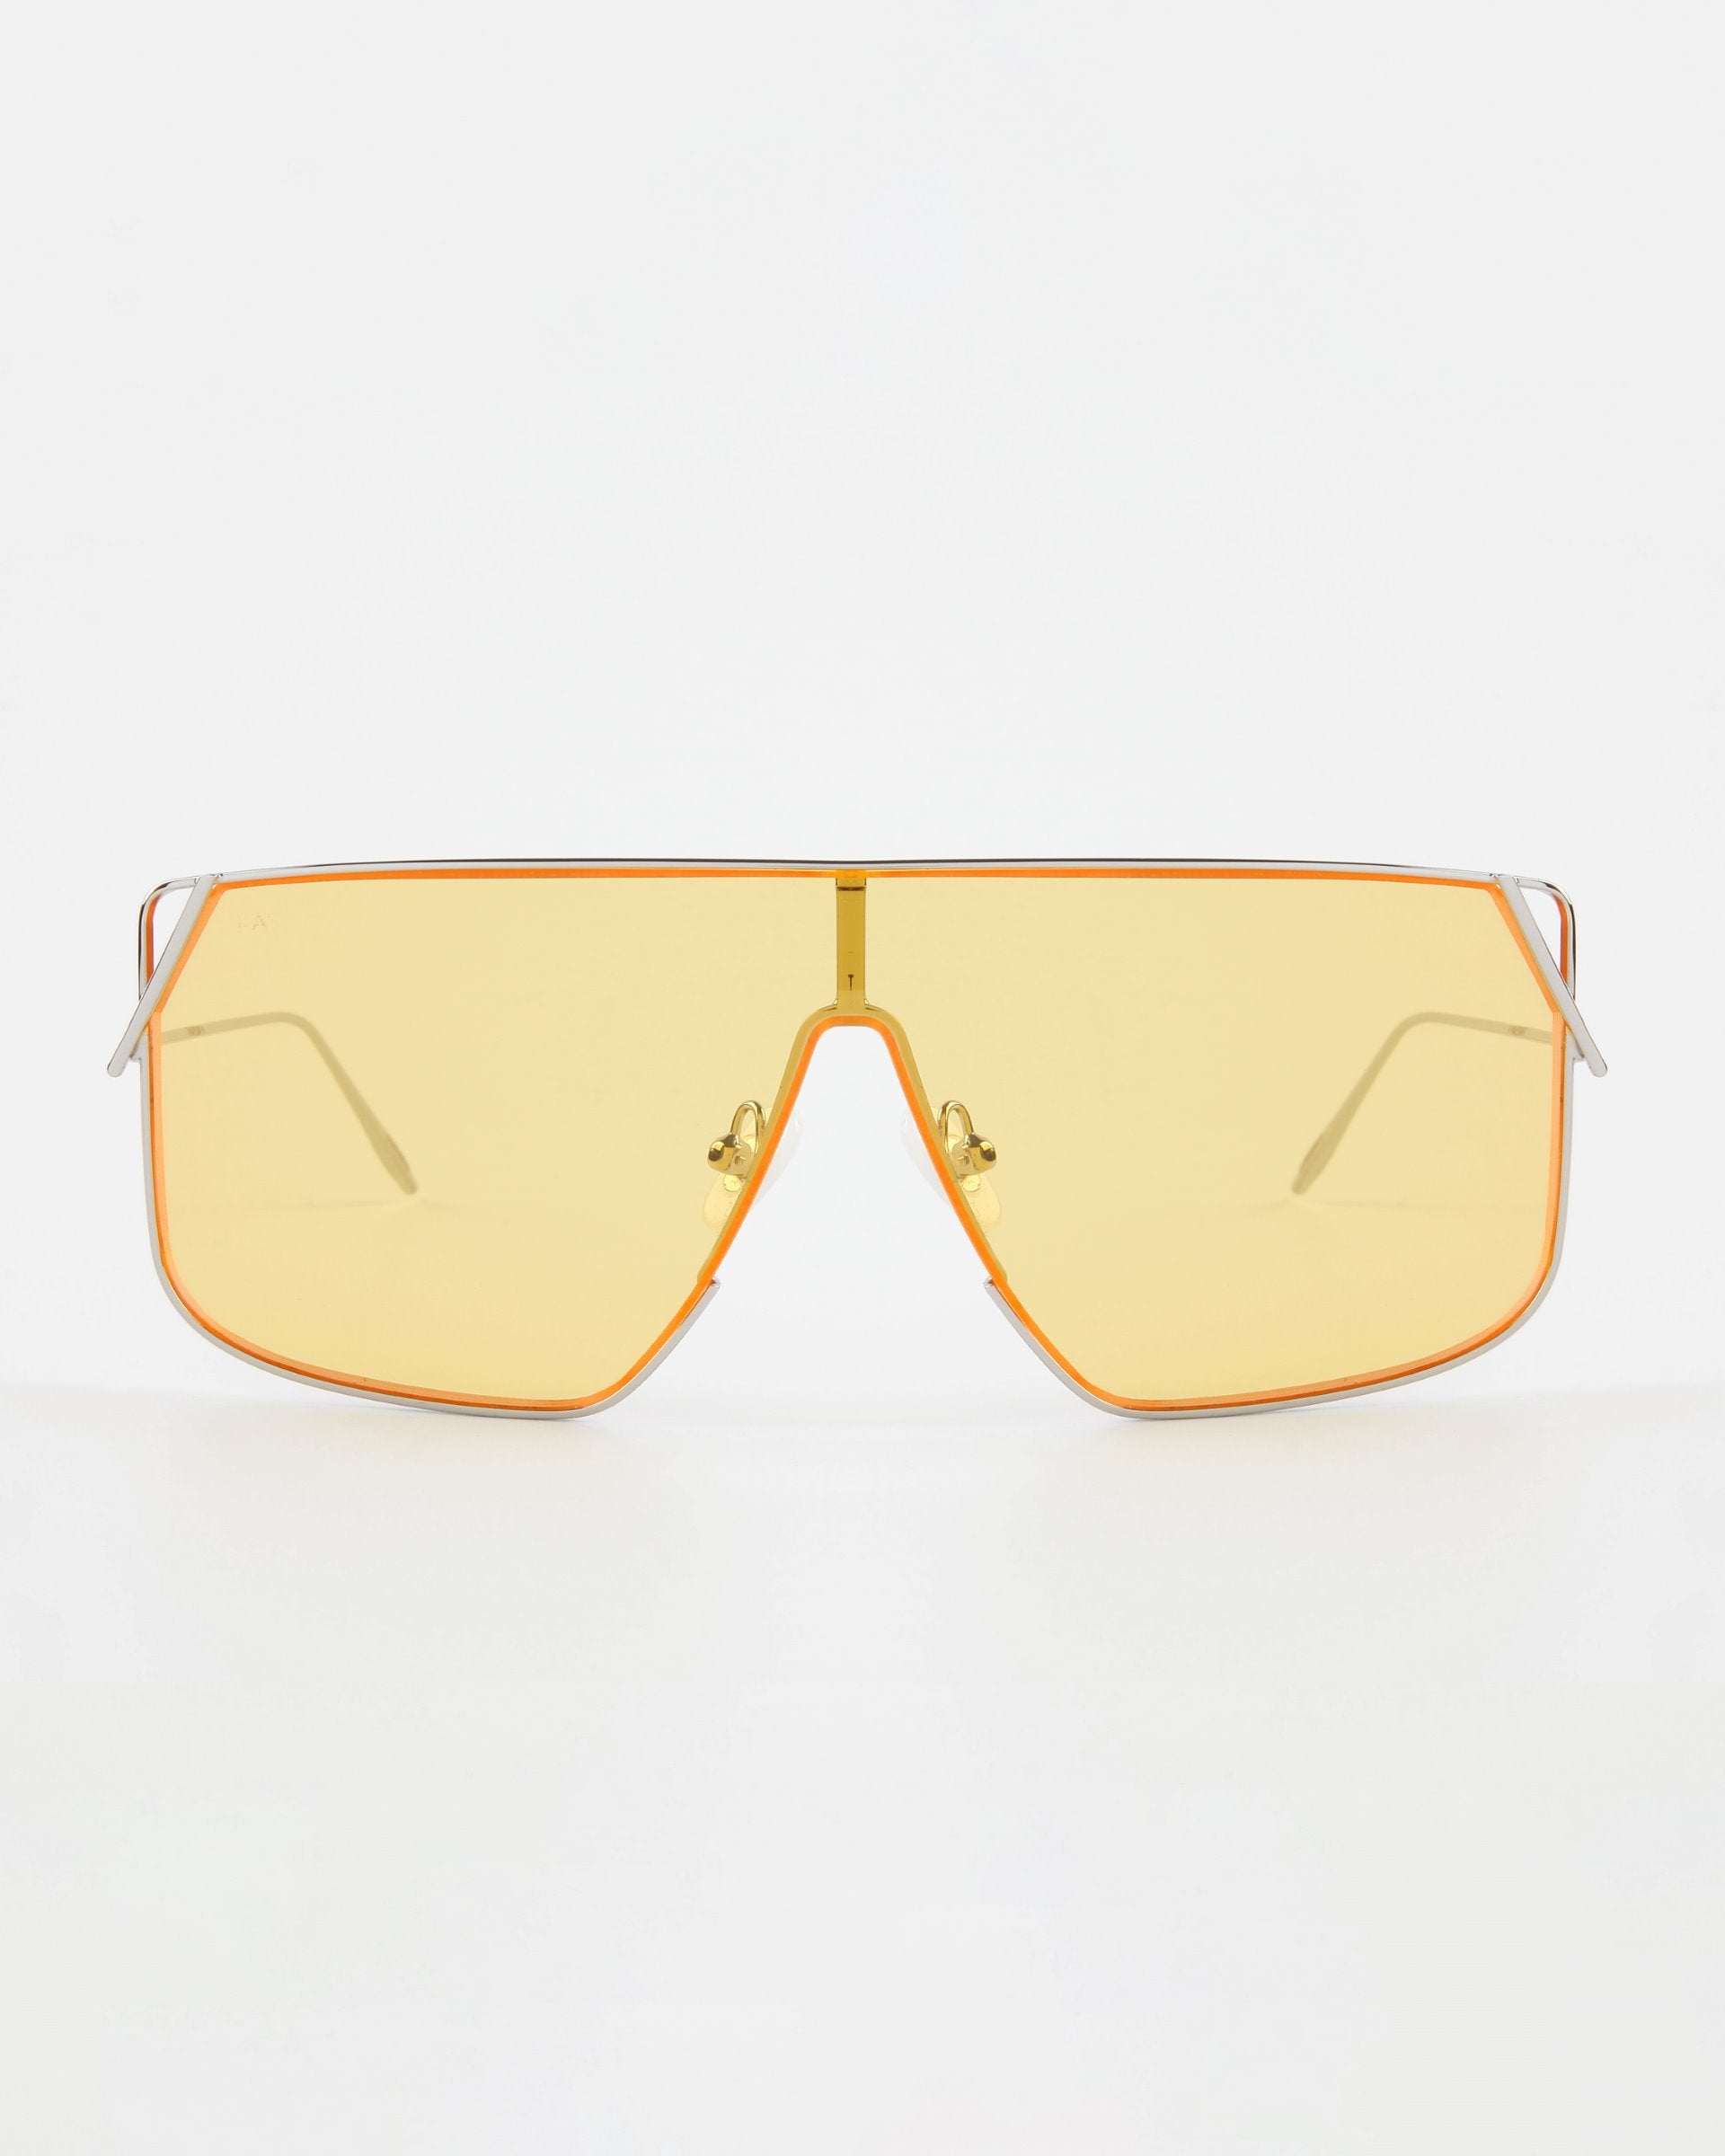 A pair of Horizon sunglasses from For Art's Sake® with large, yellow-tinted lenses. The lenses are enclosed in a thin, orange frame featuring a gold-tone bridge and adjustable nose pads. Slim stainless steel arms complement the bold design, while offering UVA & UVB protection for your eyes.